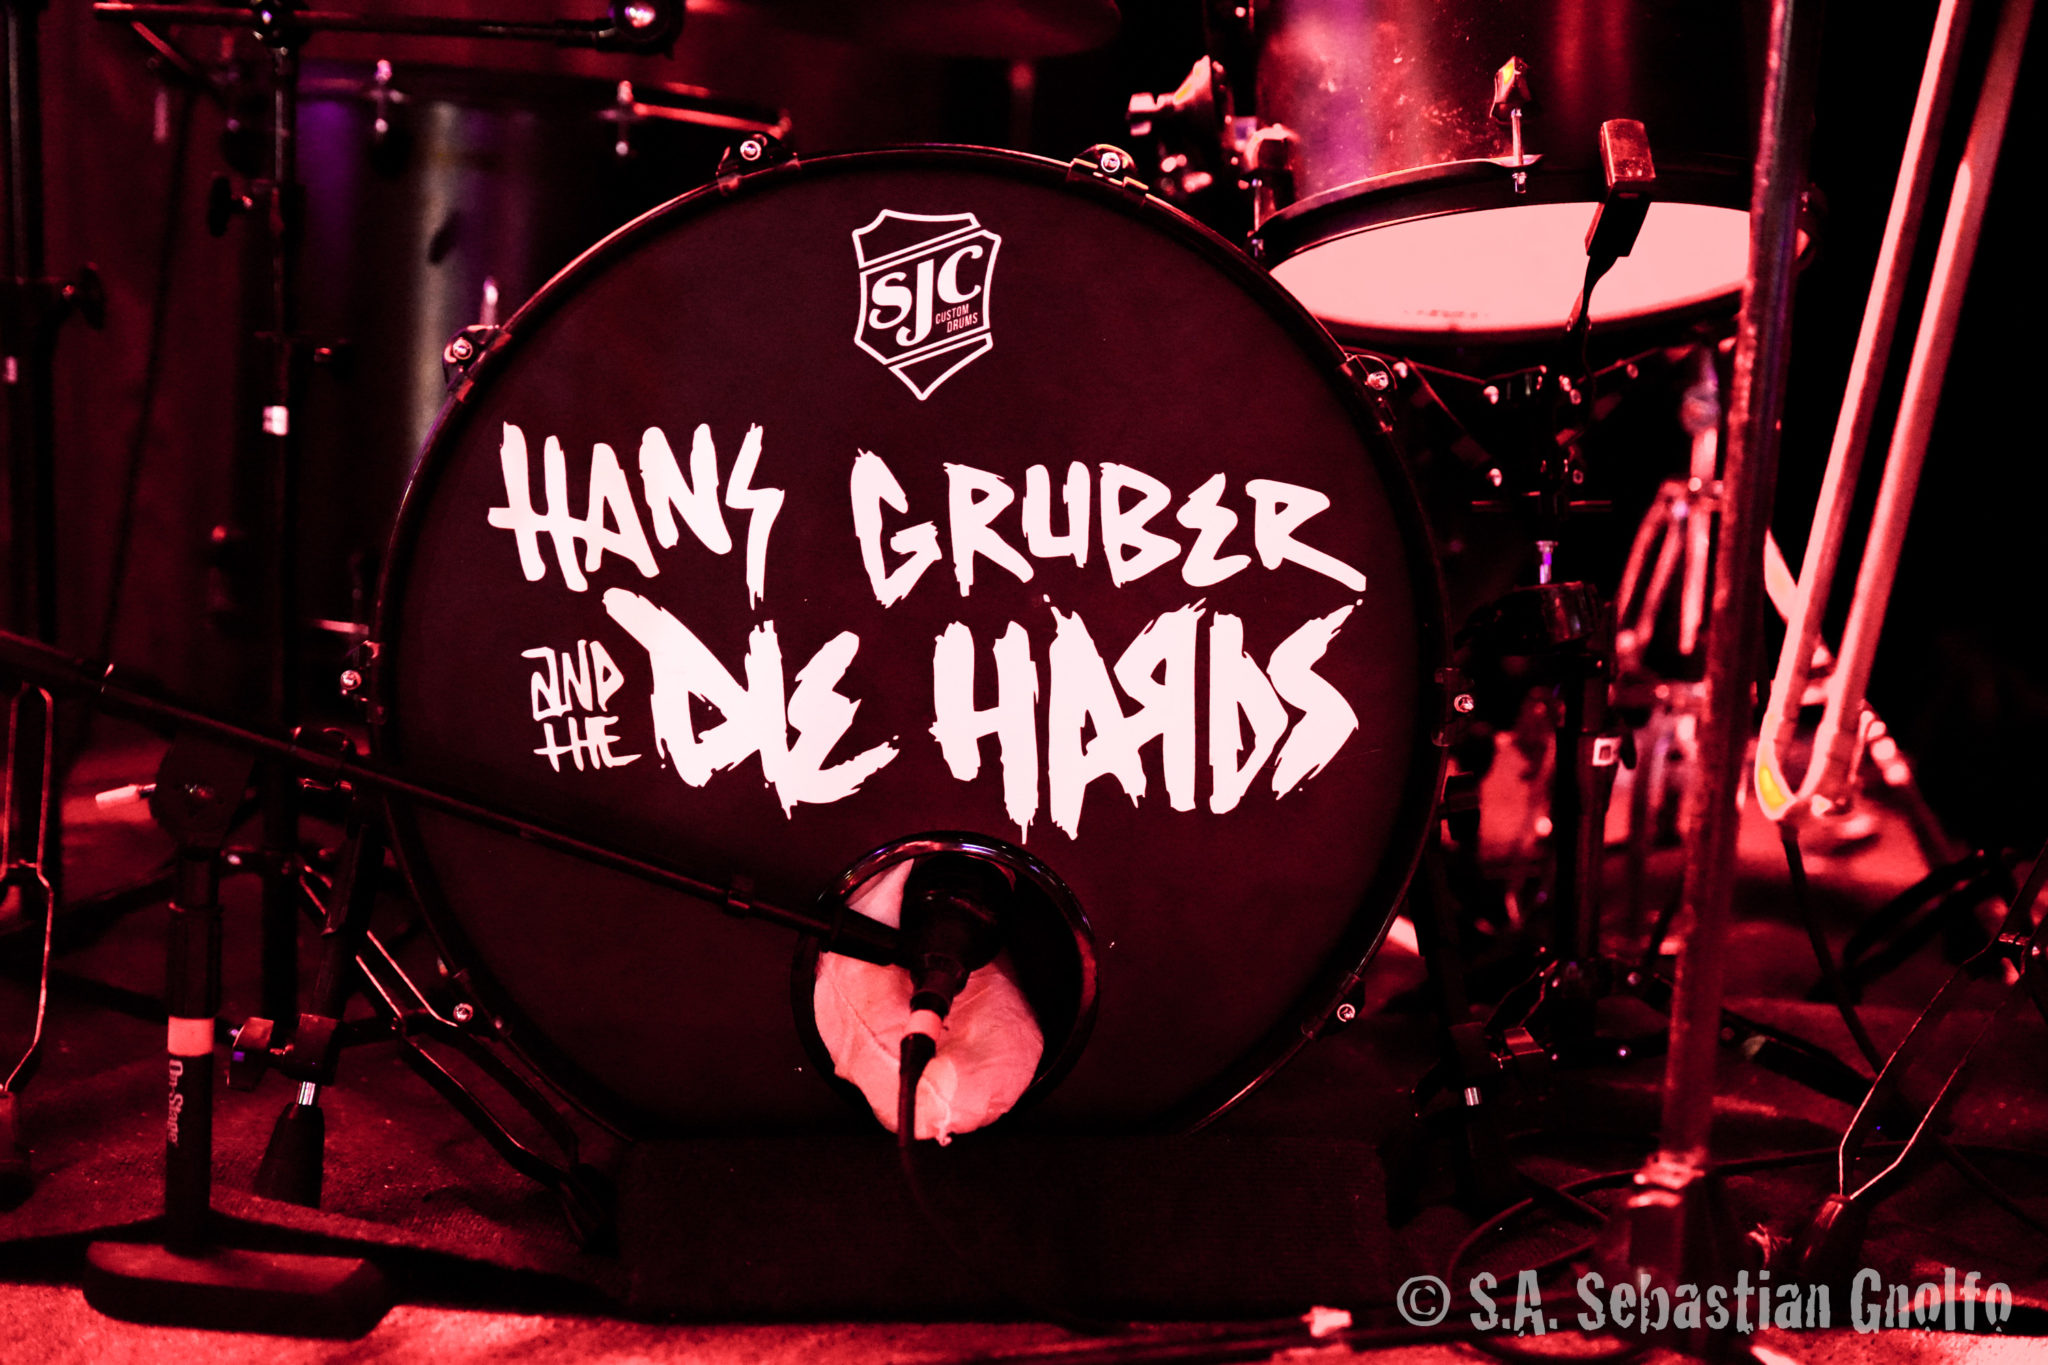 Hans Gruber And The Die Hards at Stars at Night Fest 2, 9/3/2022